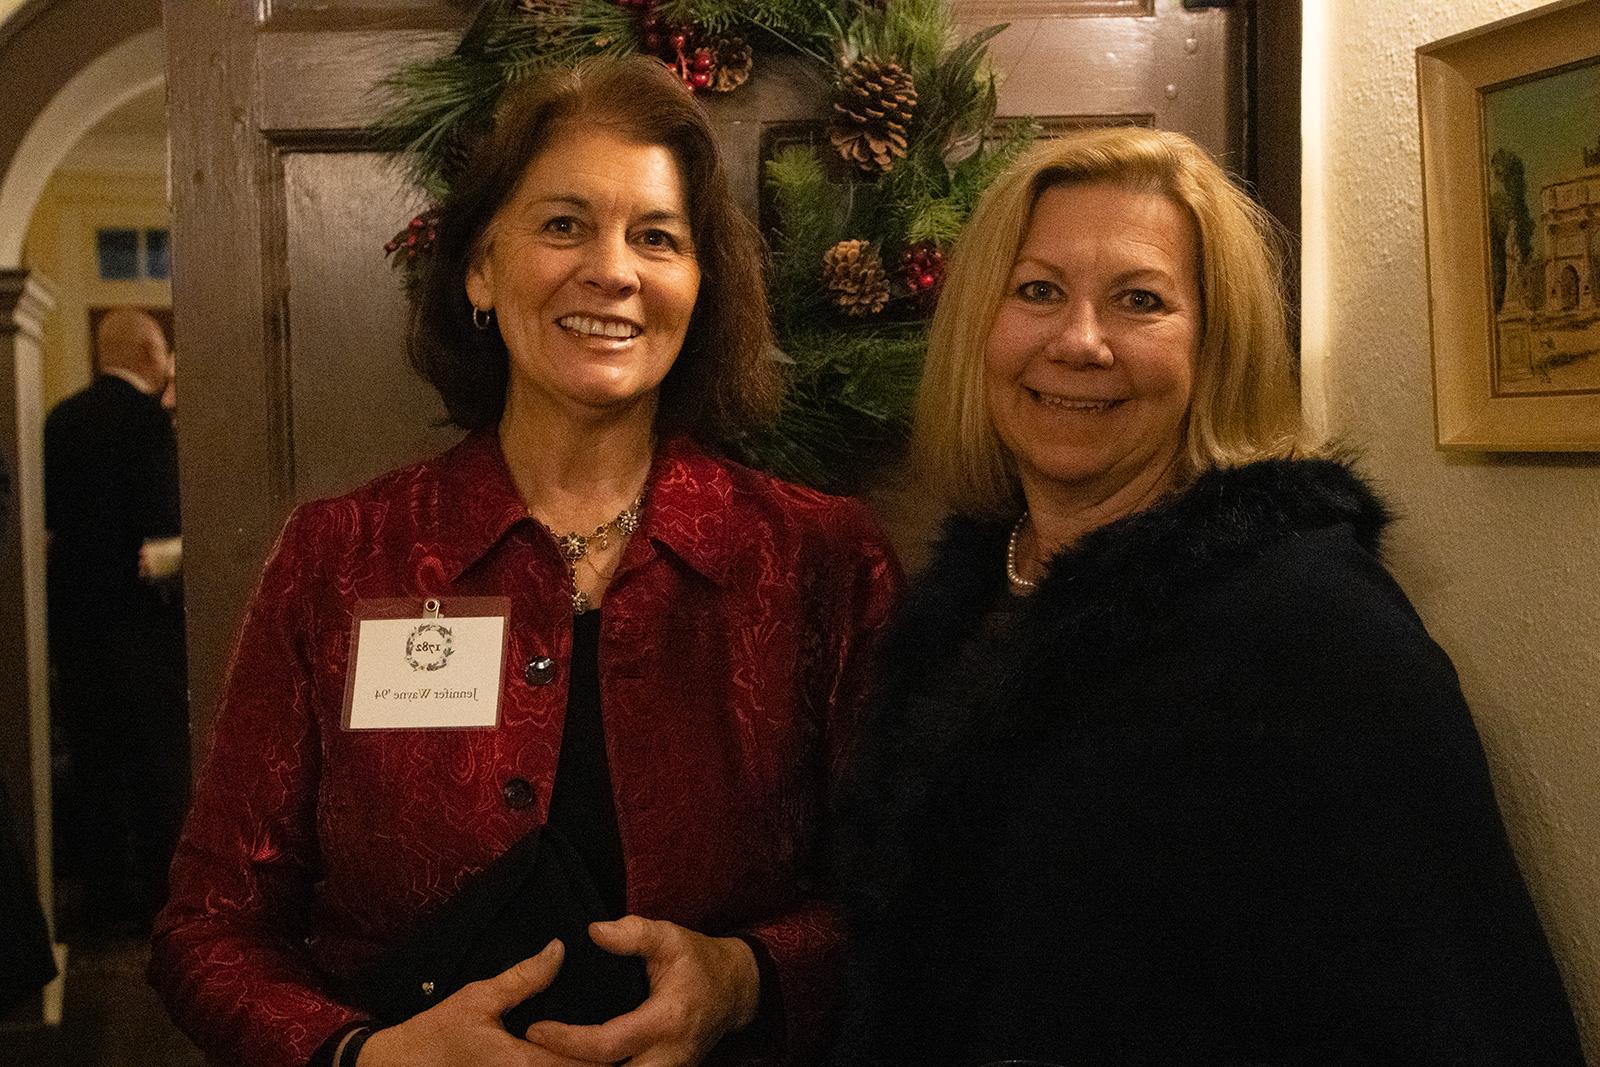 Alumni and 1782 Holiday Party